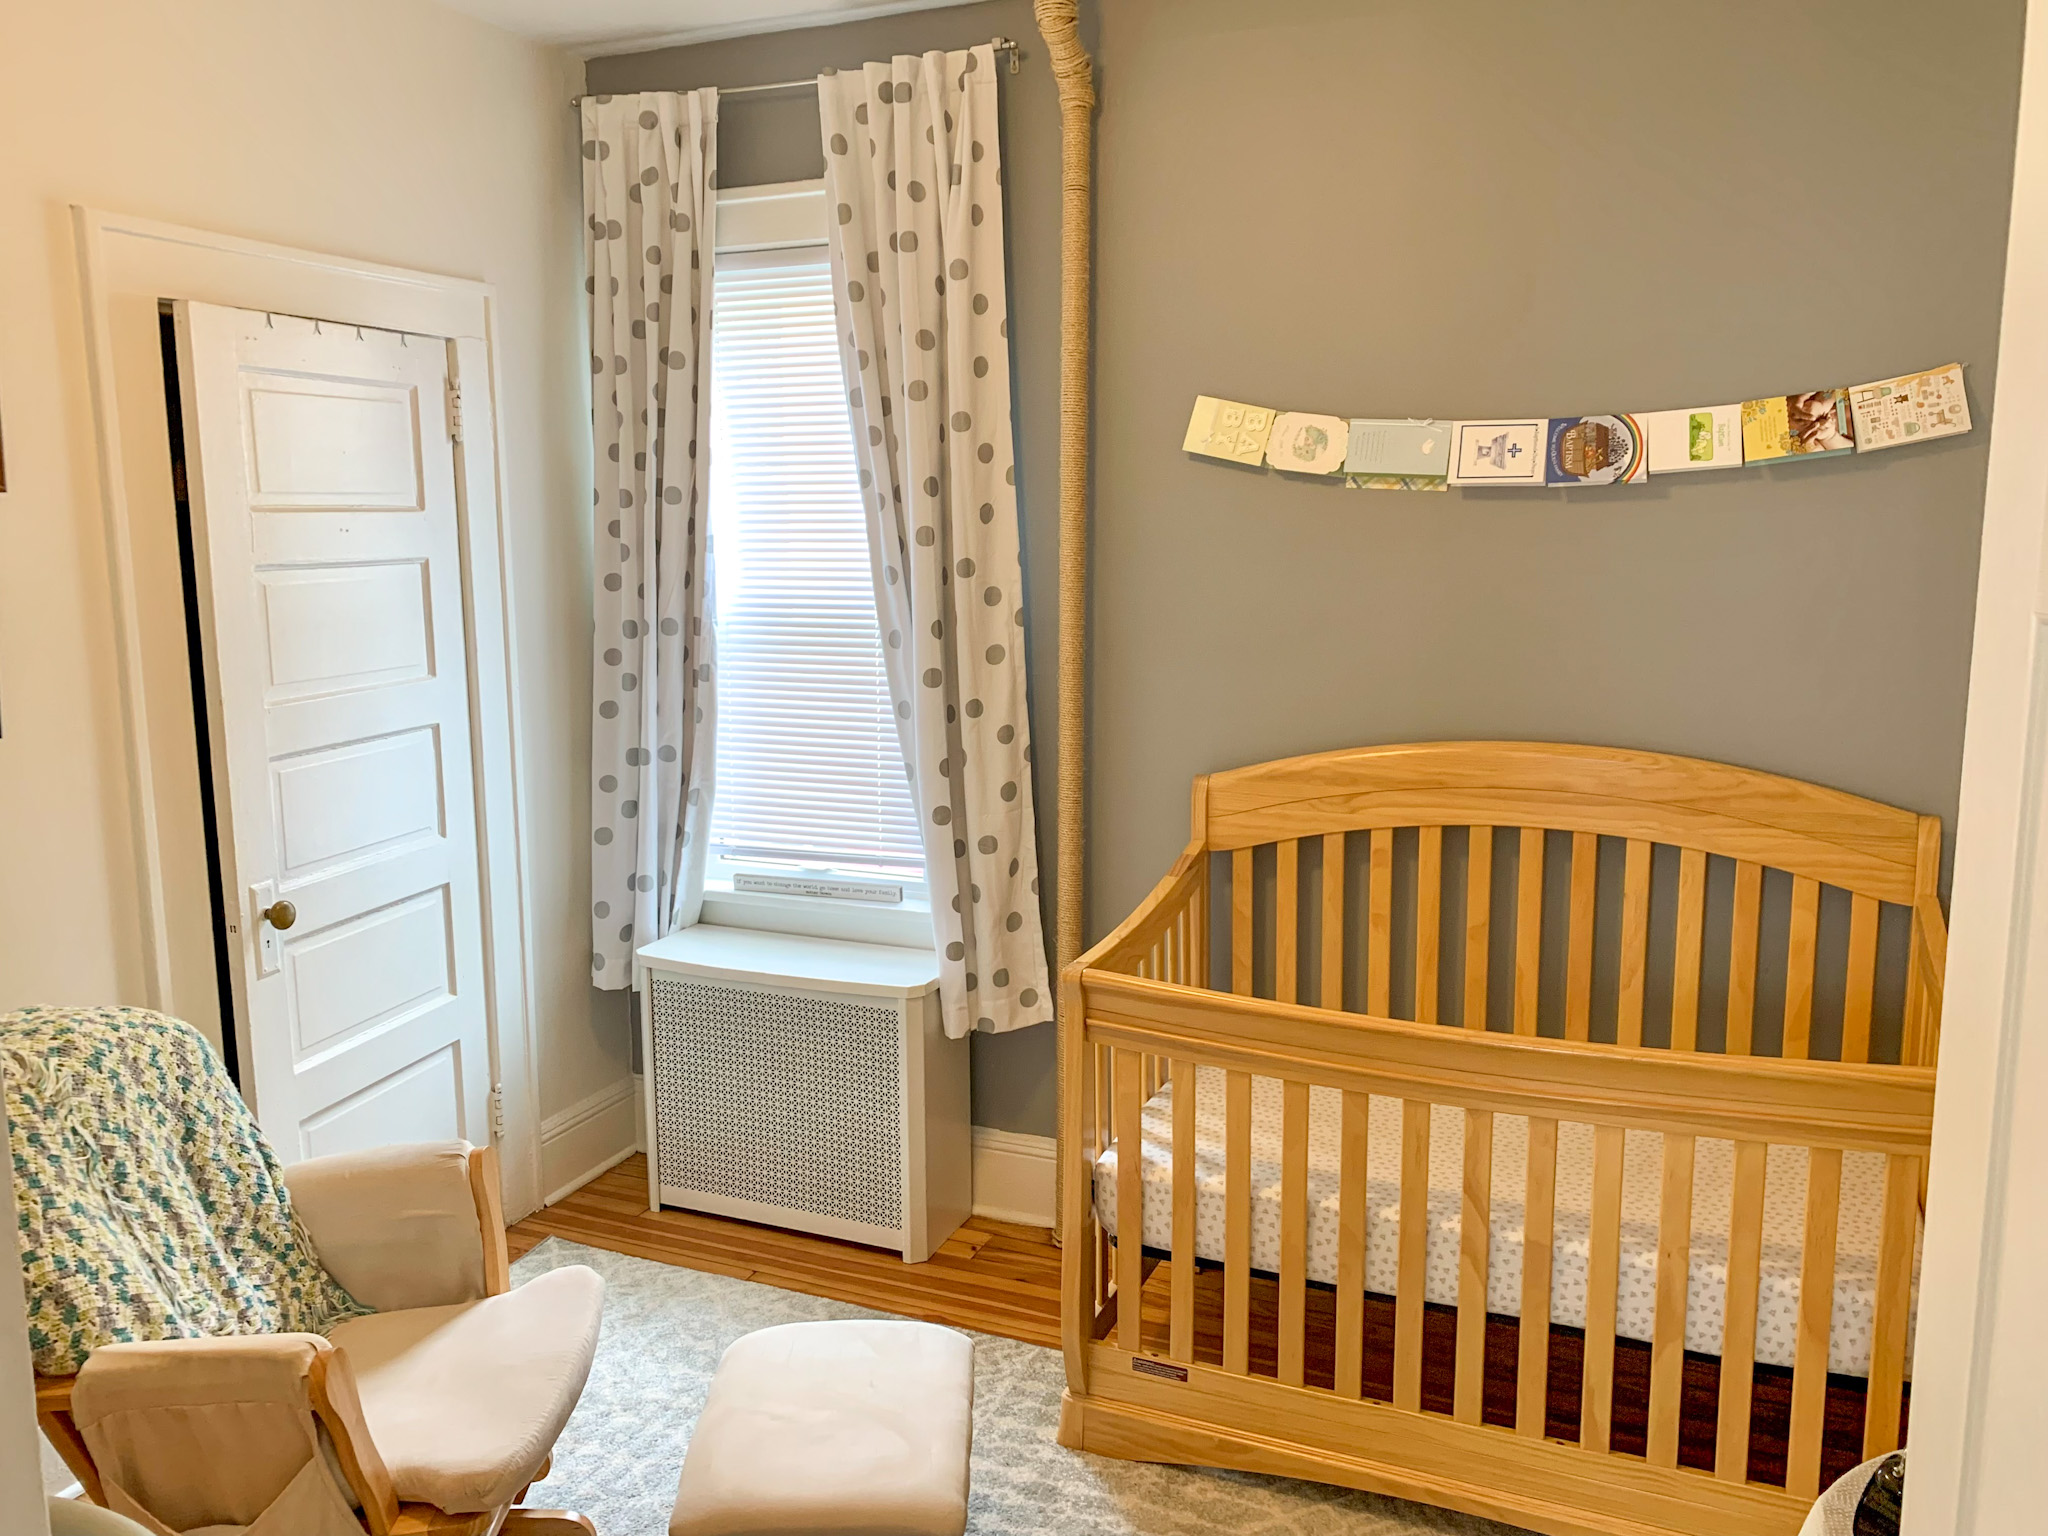 Nursery Makeover – How We “Made Do” Without Brand New